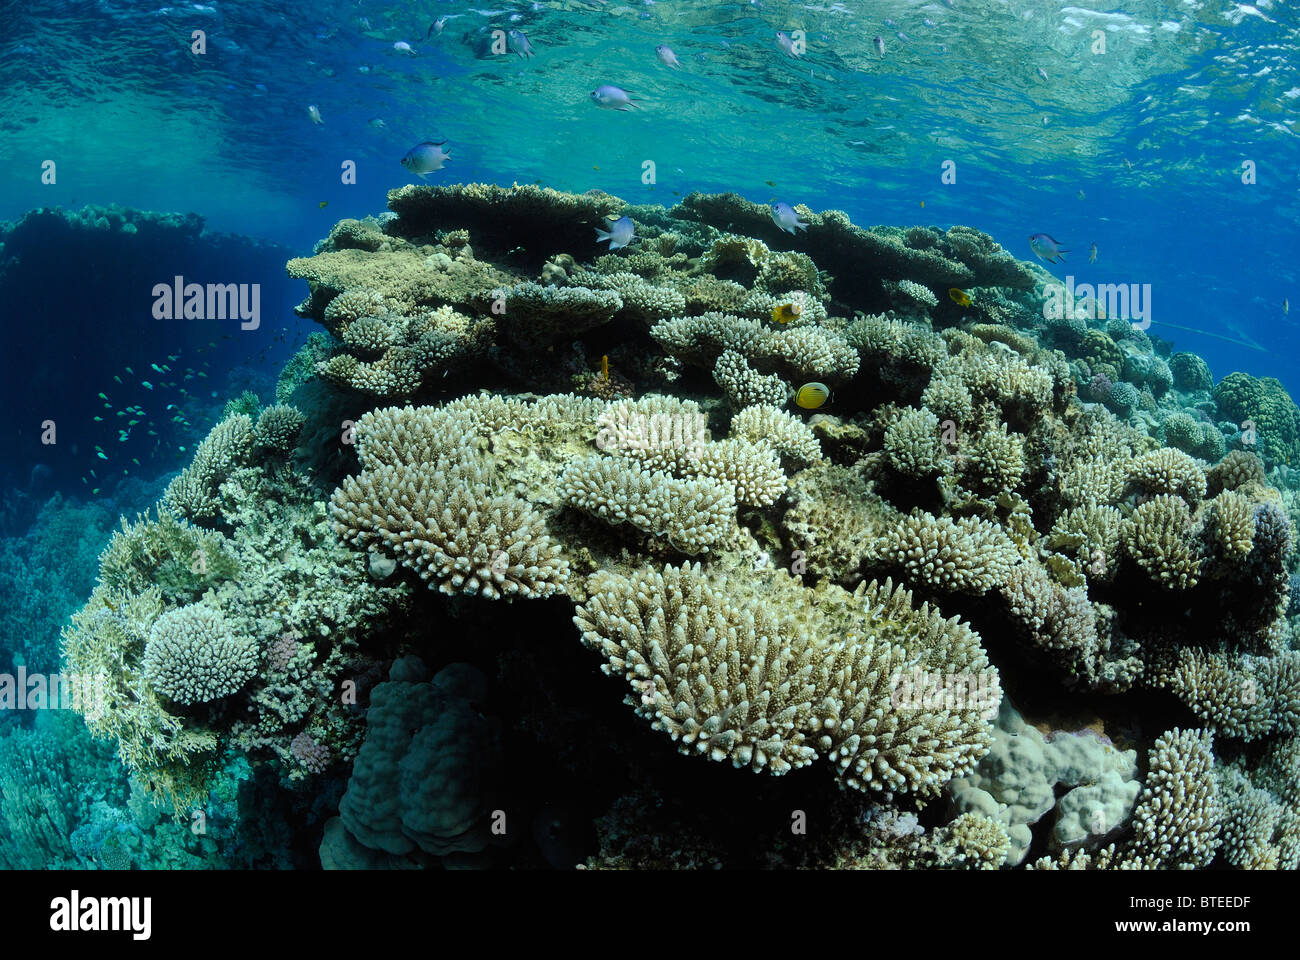 Coral reef in the Red Sea, off Safaga, Egypt. Stock Photo